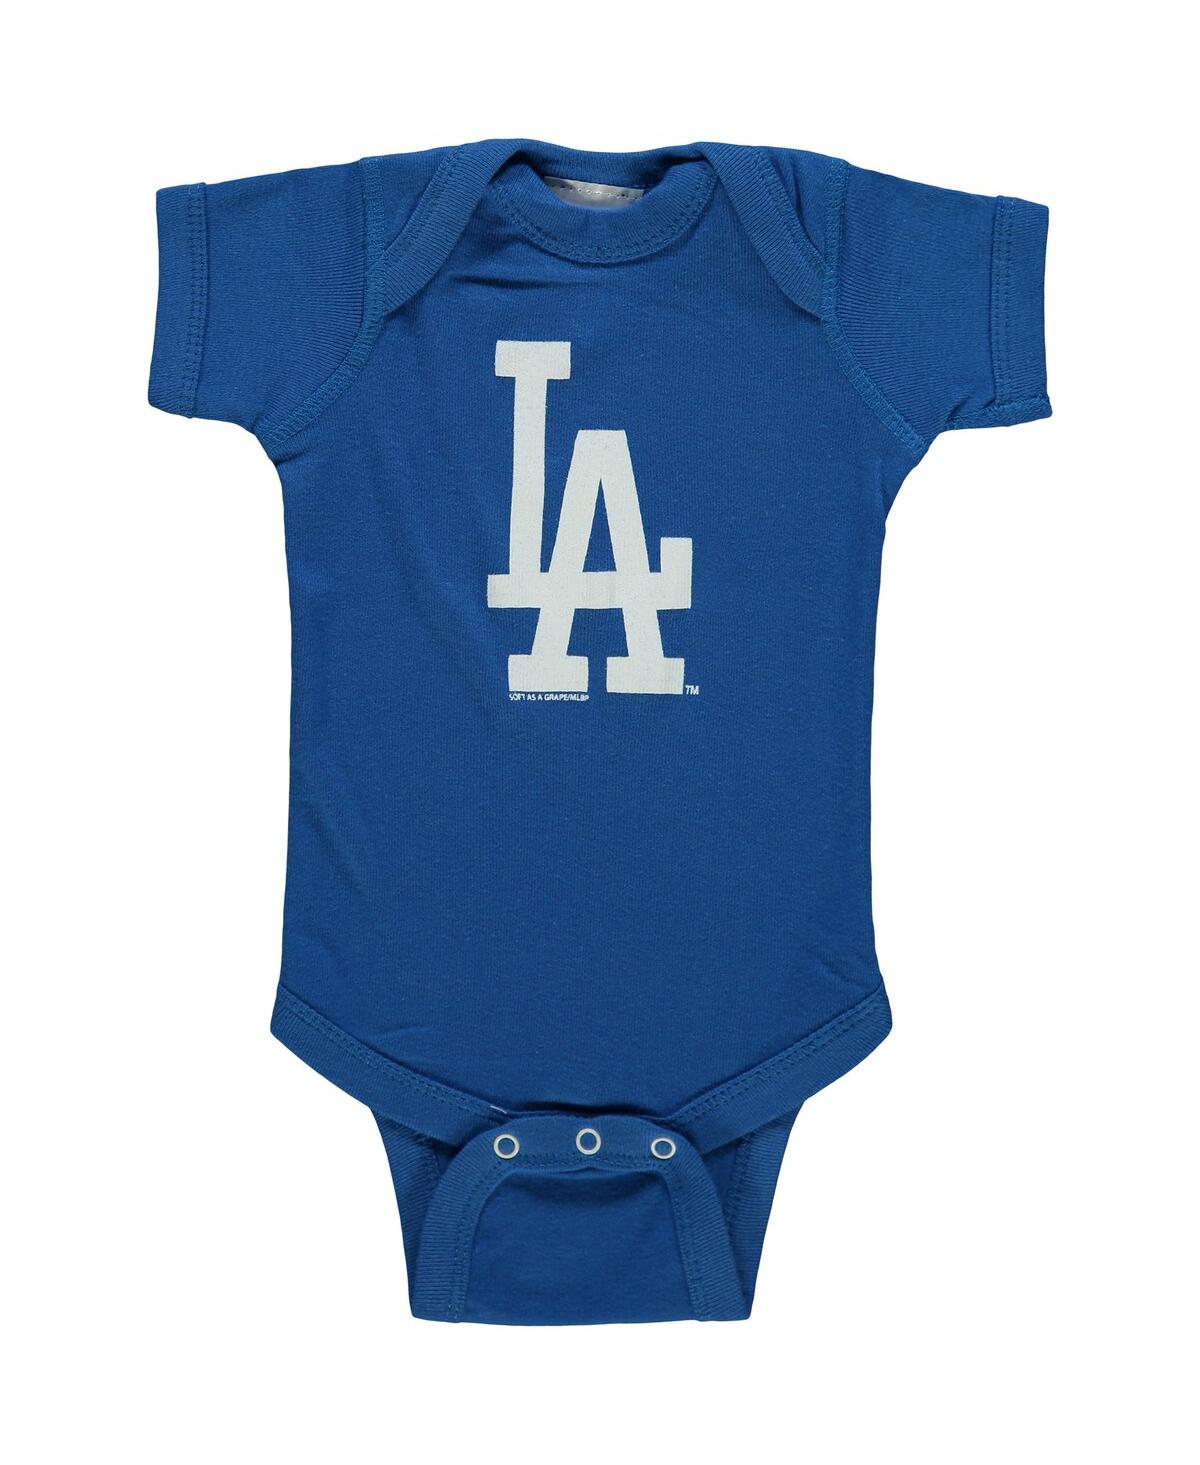 Shop Soft As A Grape Boys And Girls Newborn And Infant  Royal, Gray Los Angeles Dodgers 2-piece Body Suit In Royal,gray